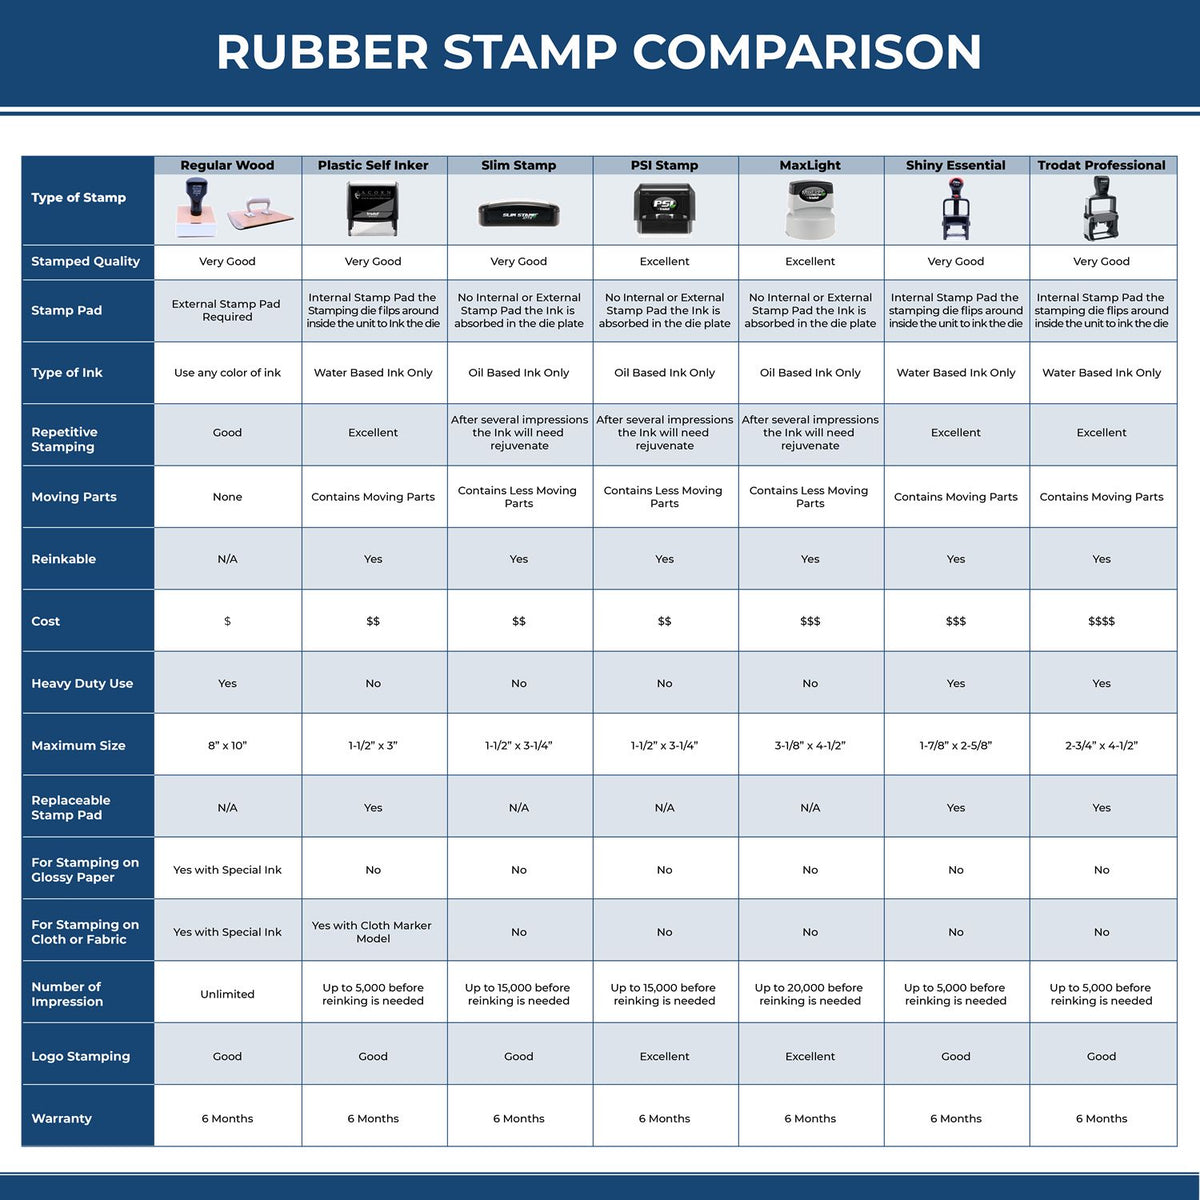 Large Self Inking Completed Together Stamp 4694S Rubber Stamp Comparison